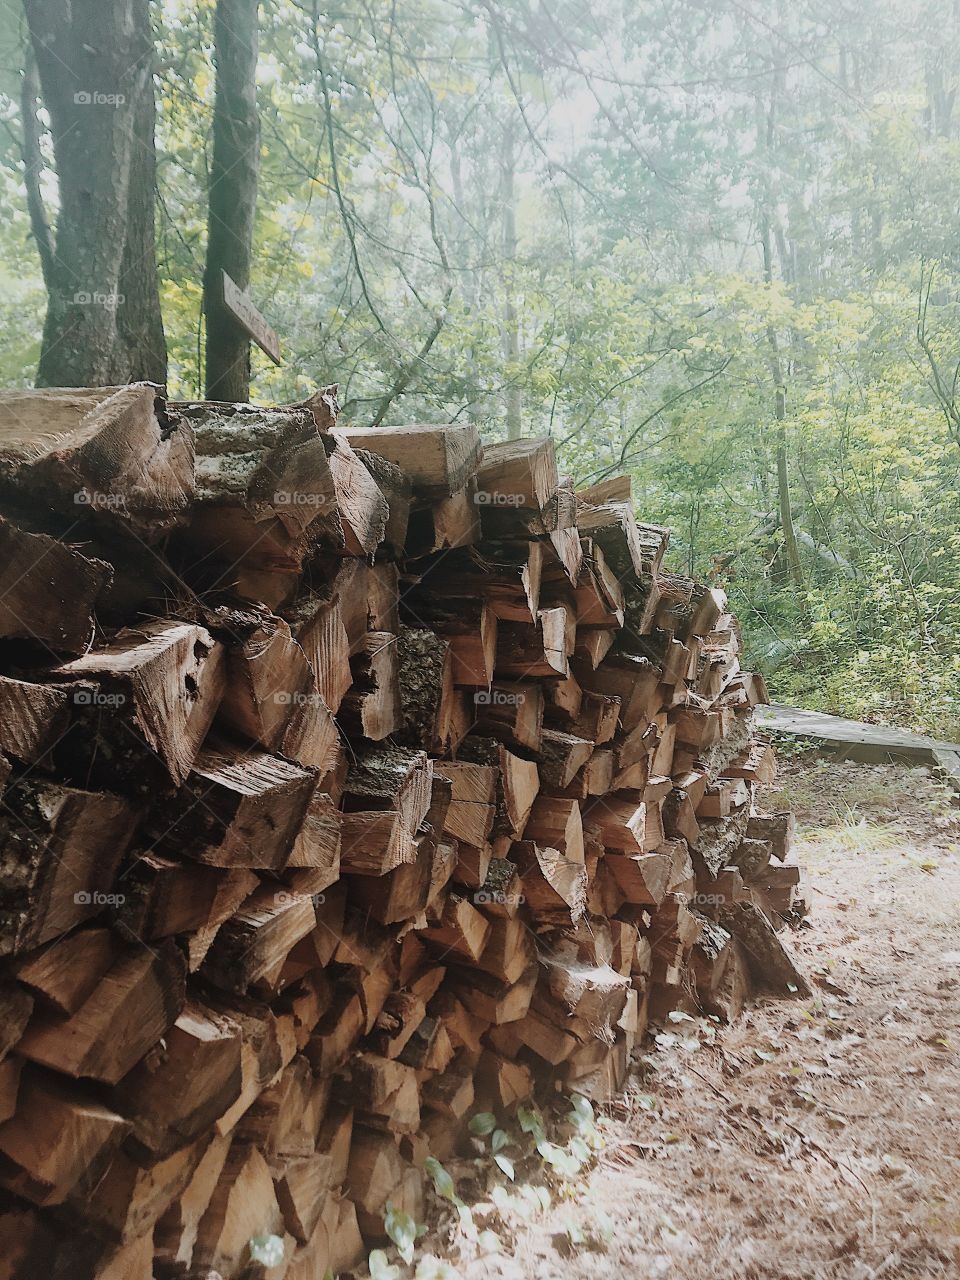 A wood pile sits on the edge of a forest path